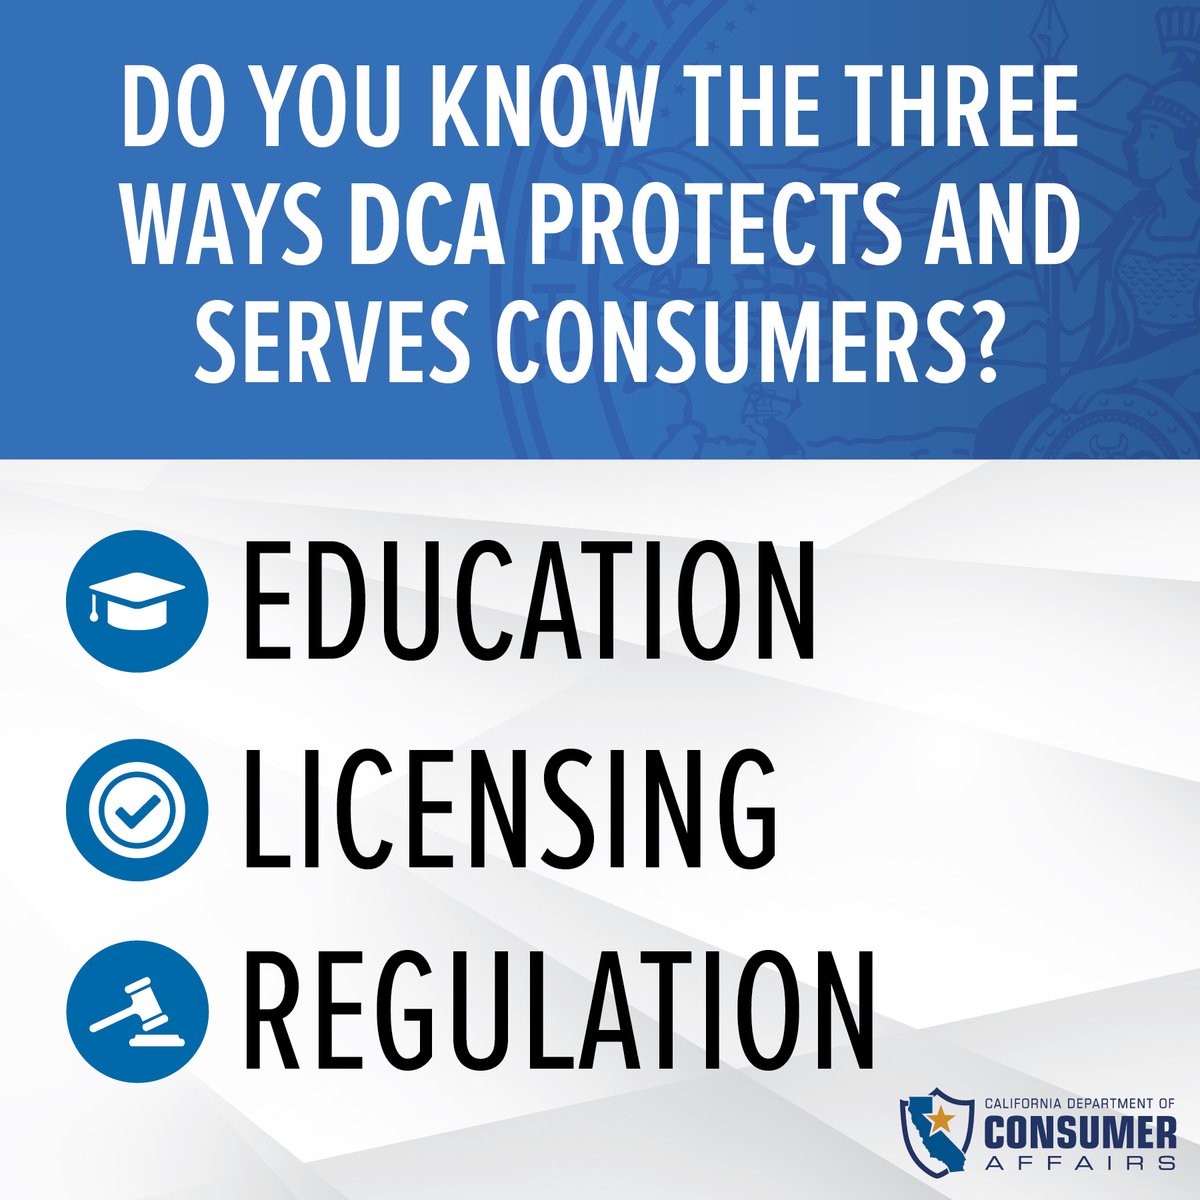 Do you know the three ways DCA protects and serves consumers? 1. Education 2. Licensing 3. Regulation We also administer more than 3.4 million licenses in more than 280 license types! To verify a license or learn more, please visit: dca.ca.gov